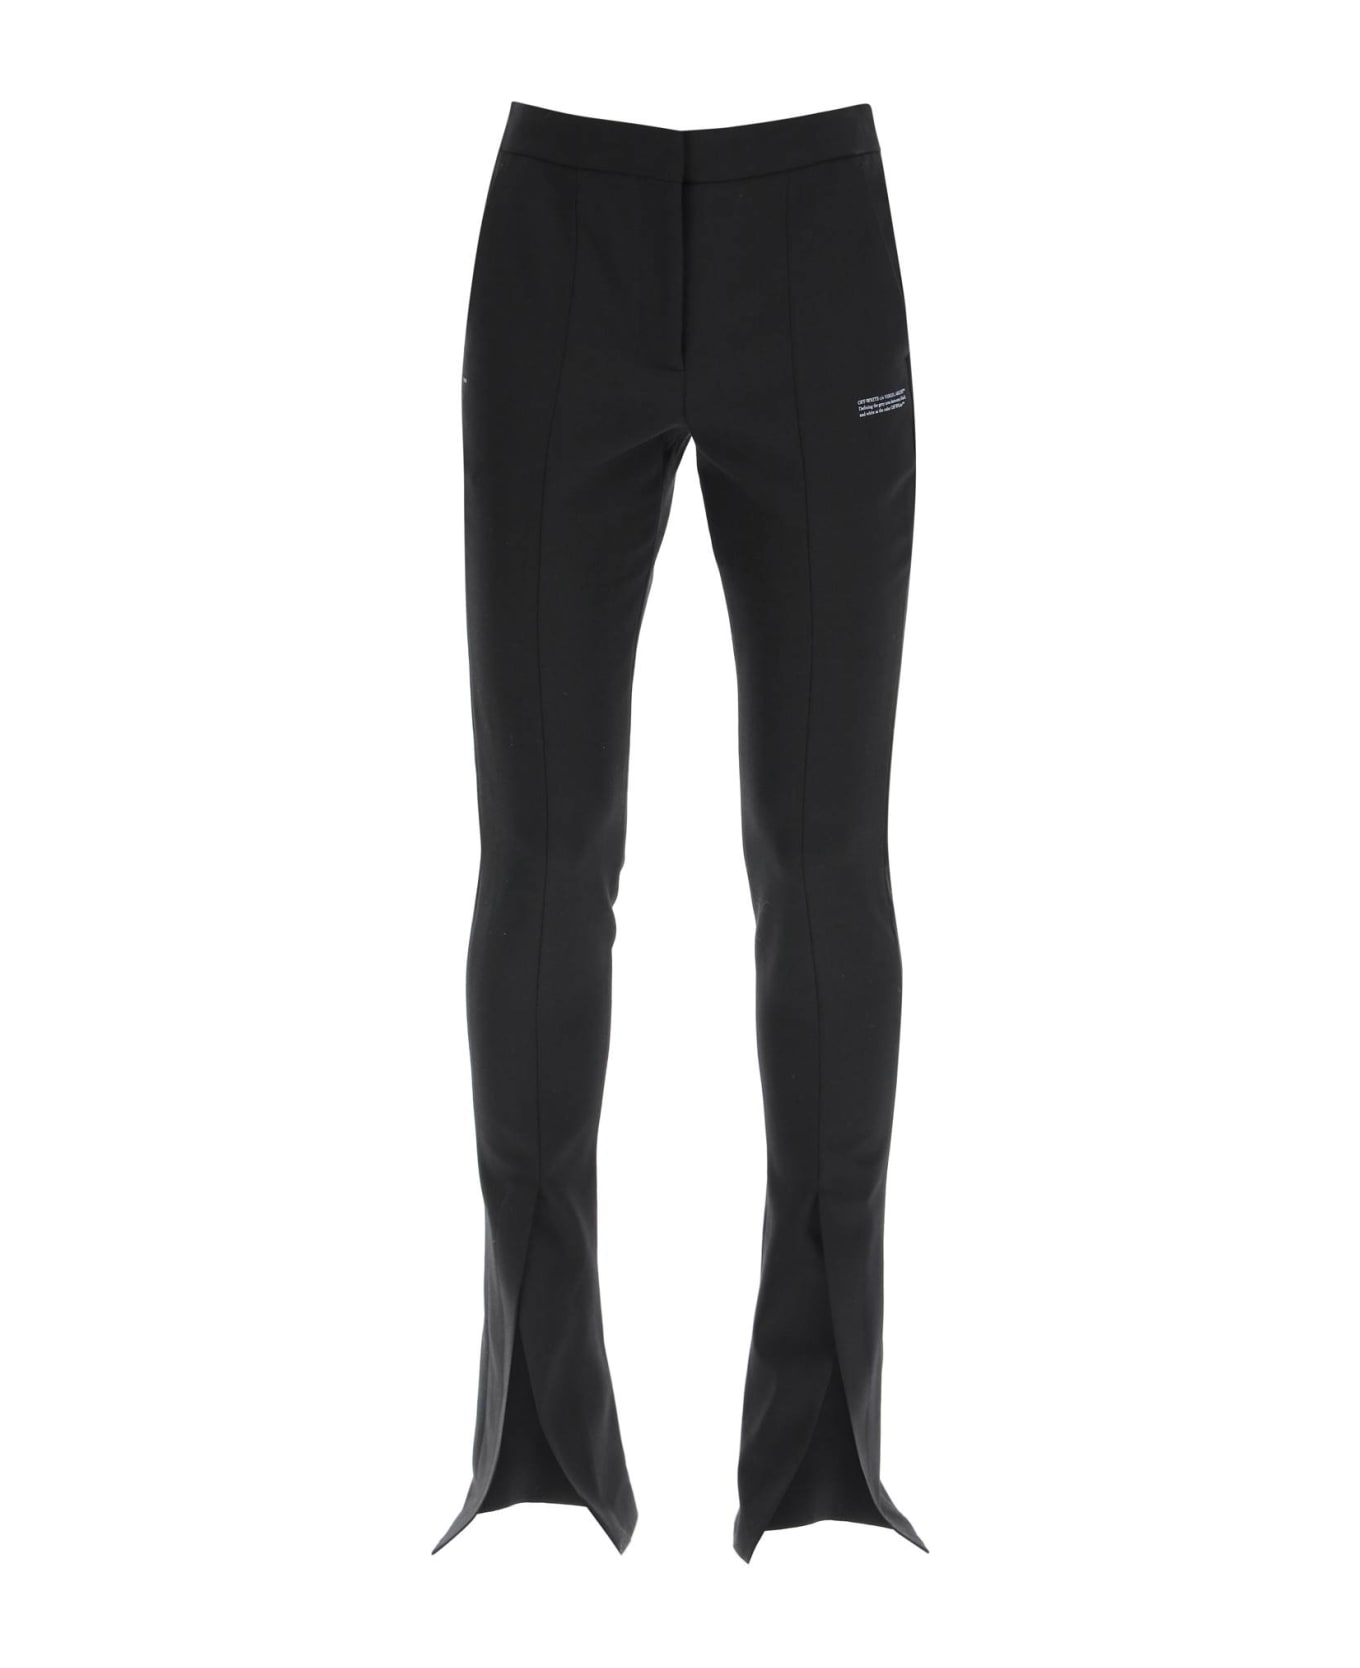 Off-White Corporate Tailored Trousers - Black/white